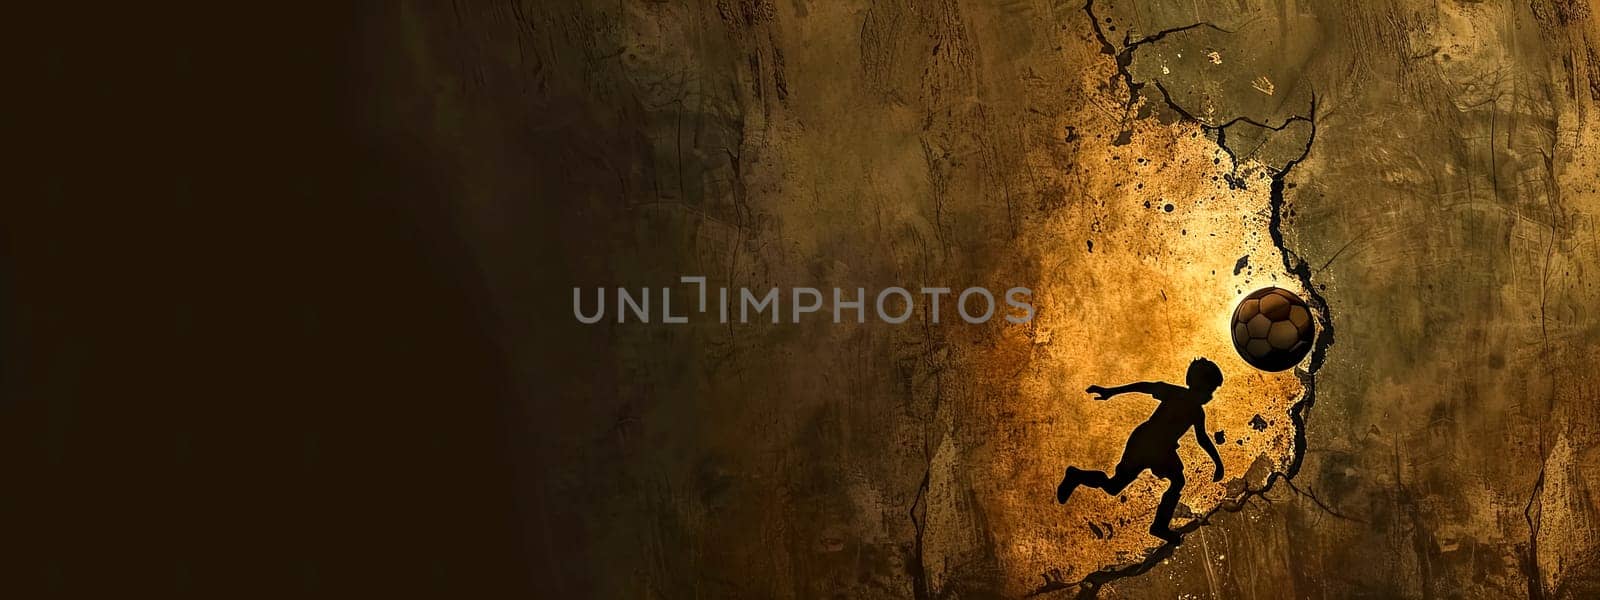 Dynamic silhouette of a soccer player and ball against a cave wall background. by Edophoto